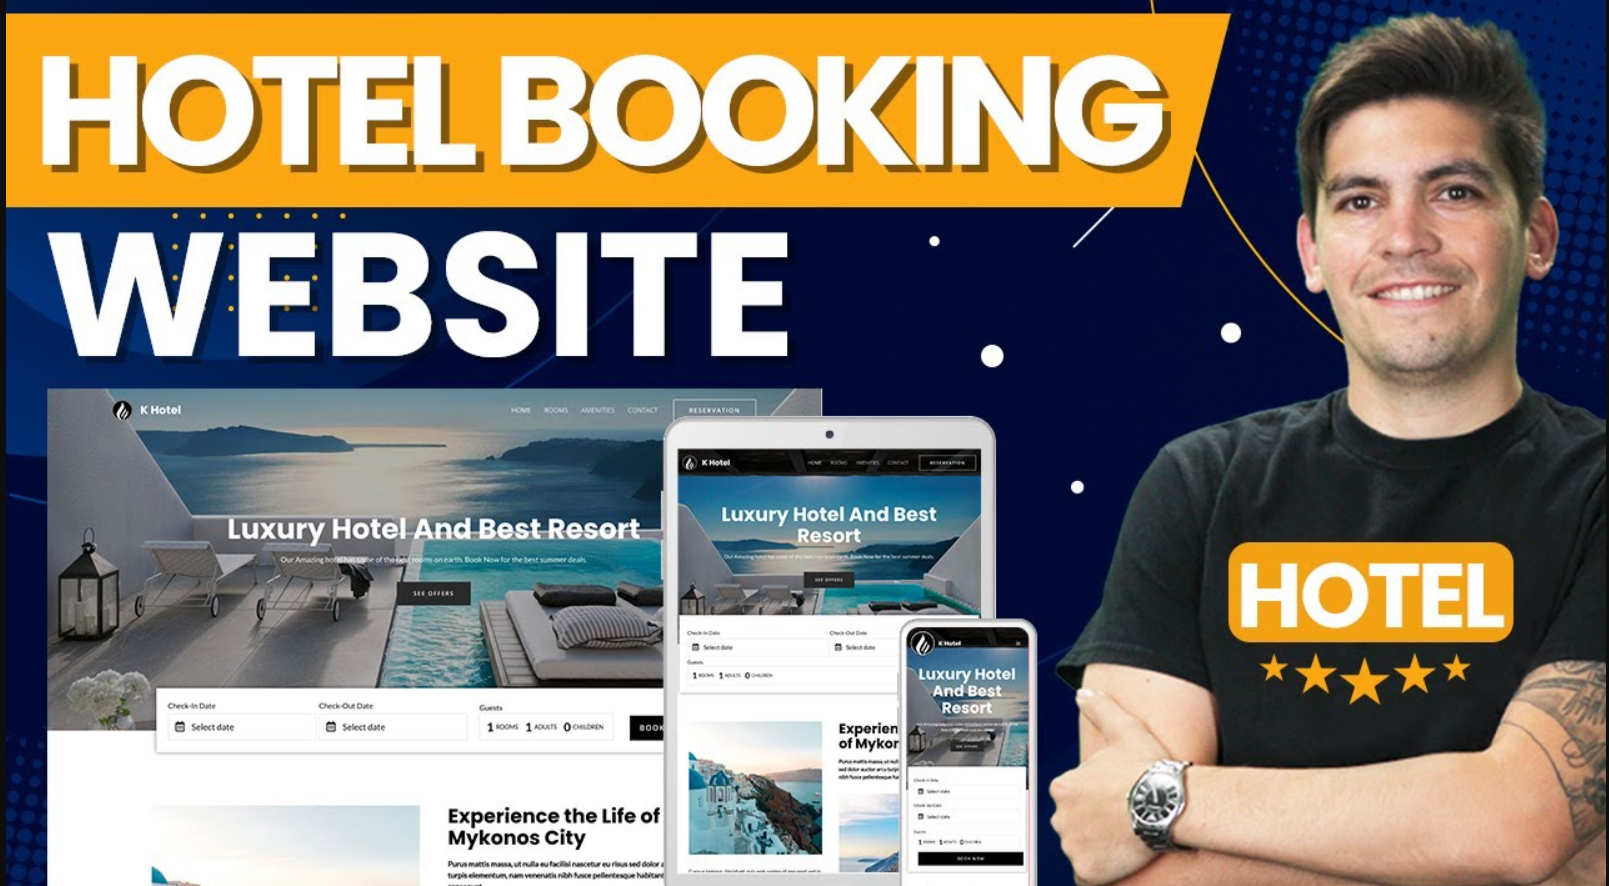 Hotel Websites: Showcase your hotel with a powerful website featuring booking functionalities.